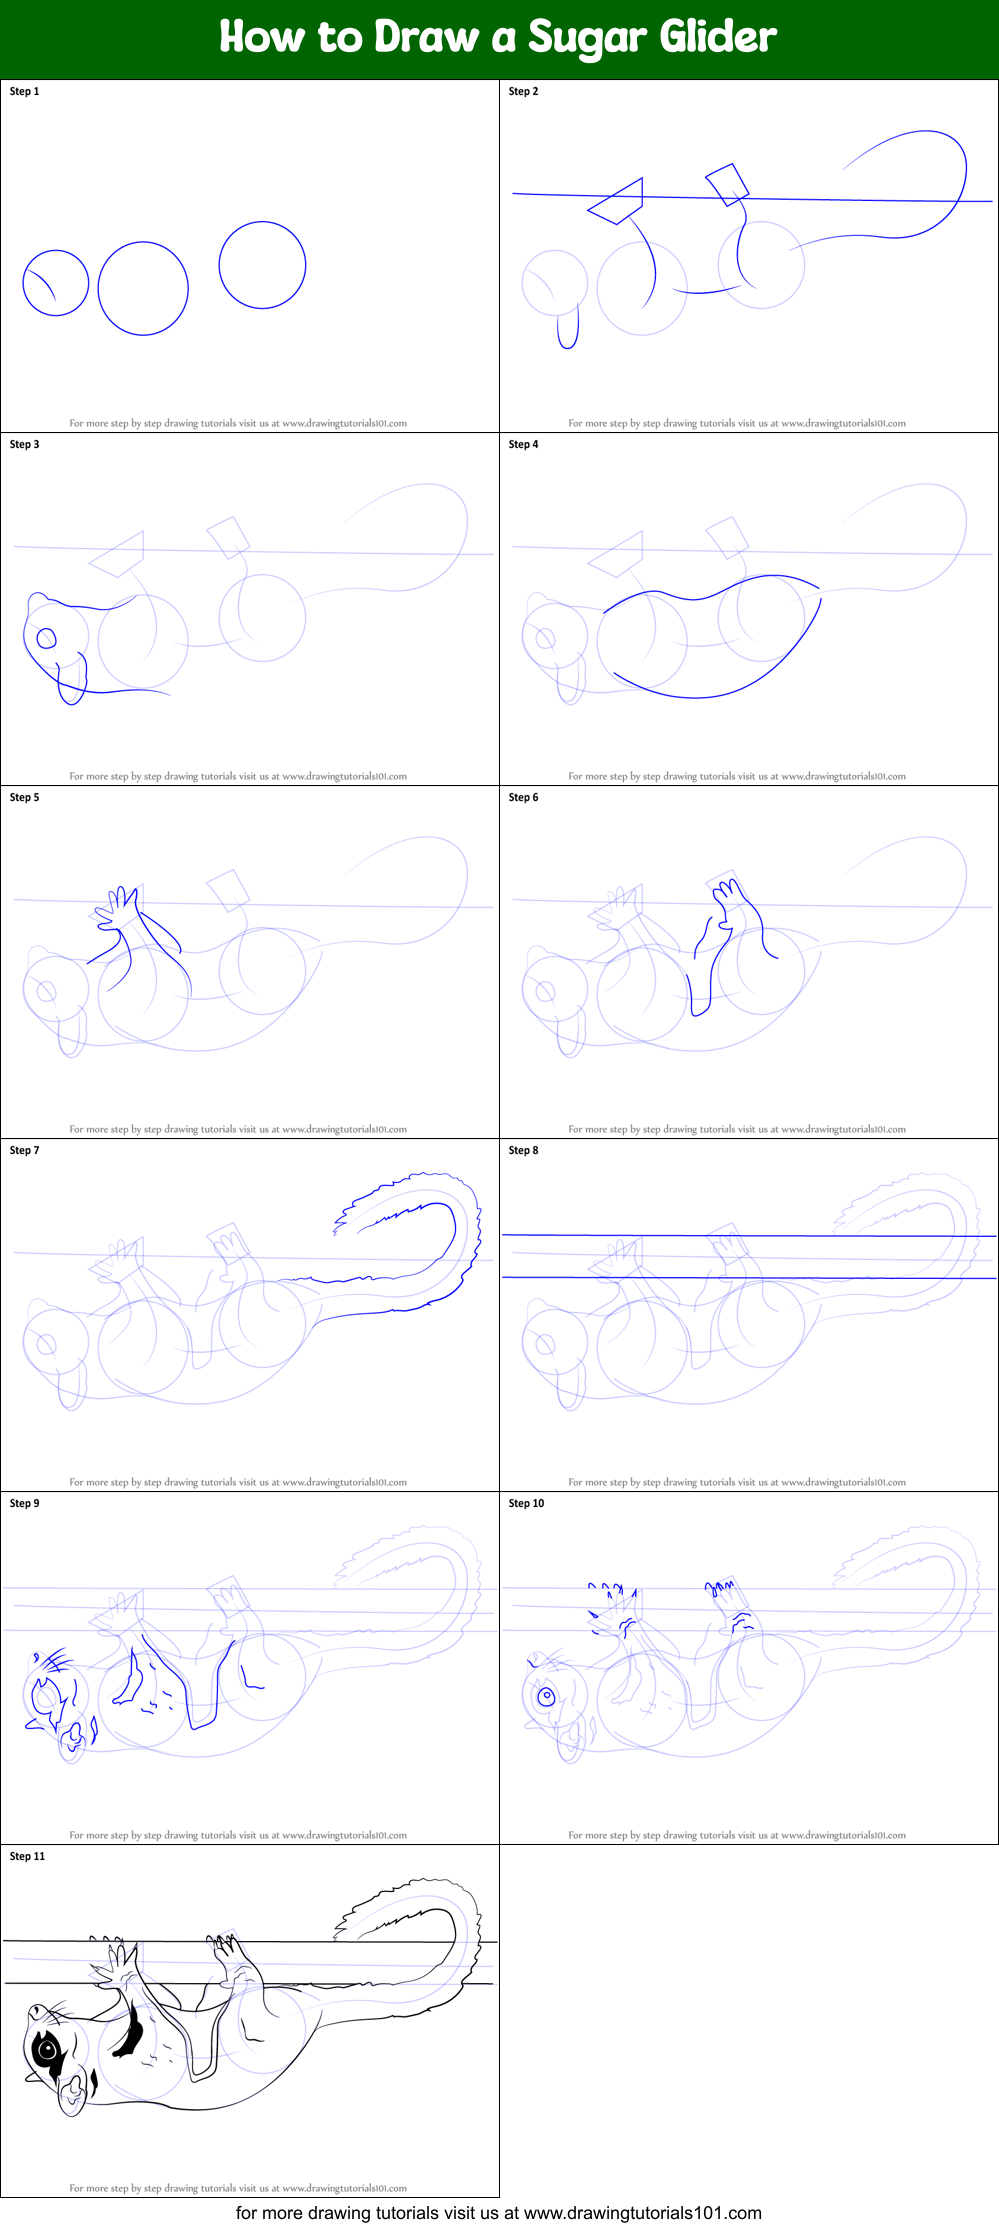 How to Draw a Sugar Glider printable step by step drawing sheet